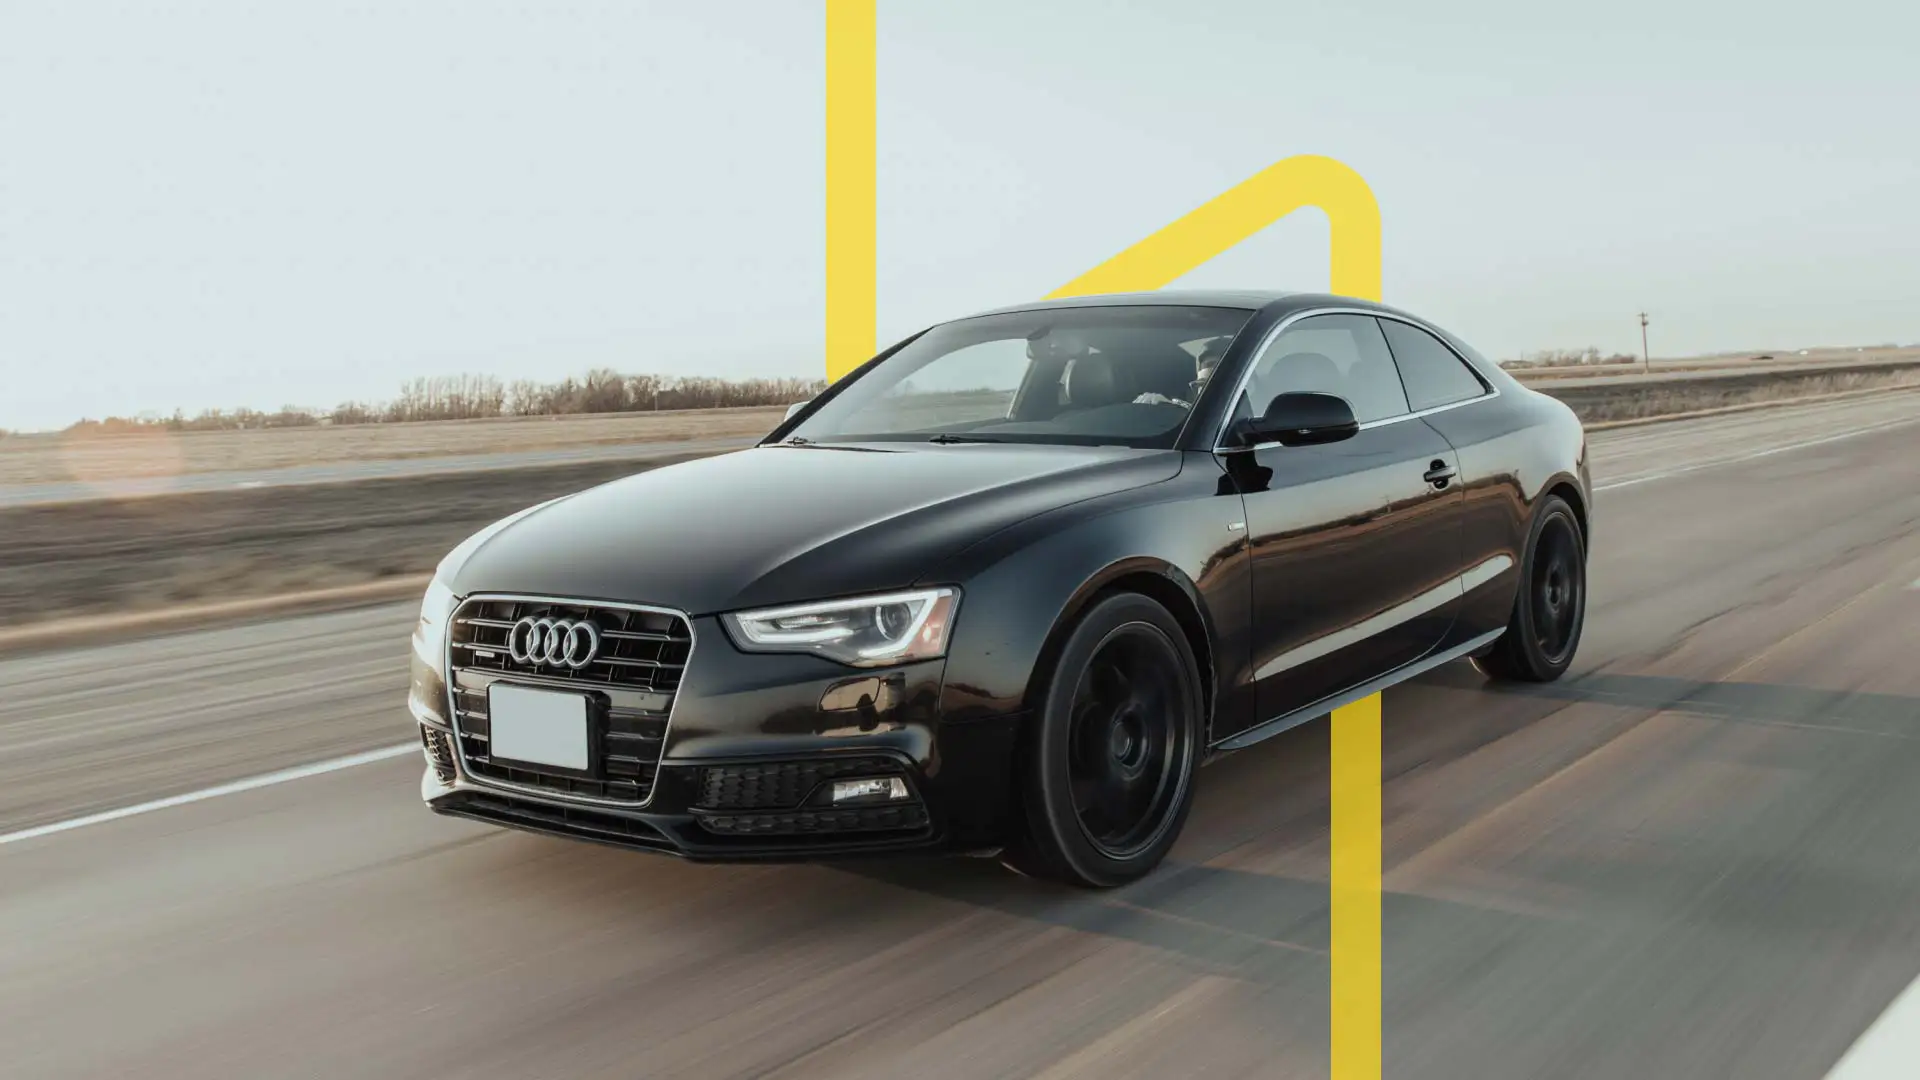 A black Audi driving on a road with a yellow line deign in the background.